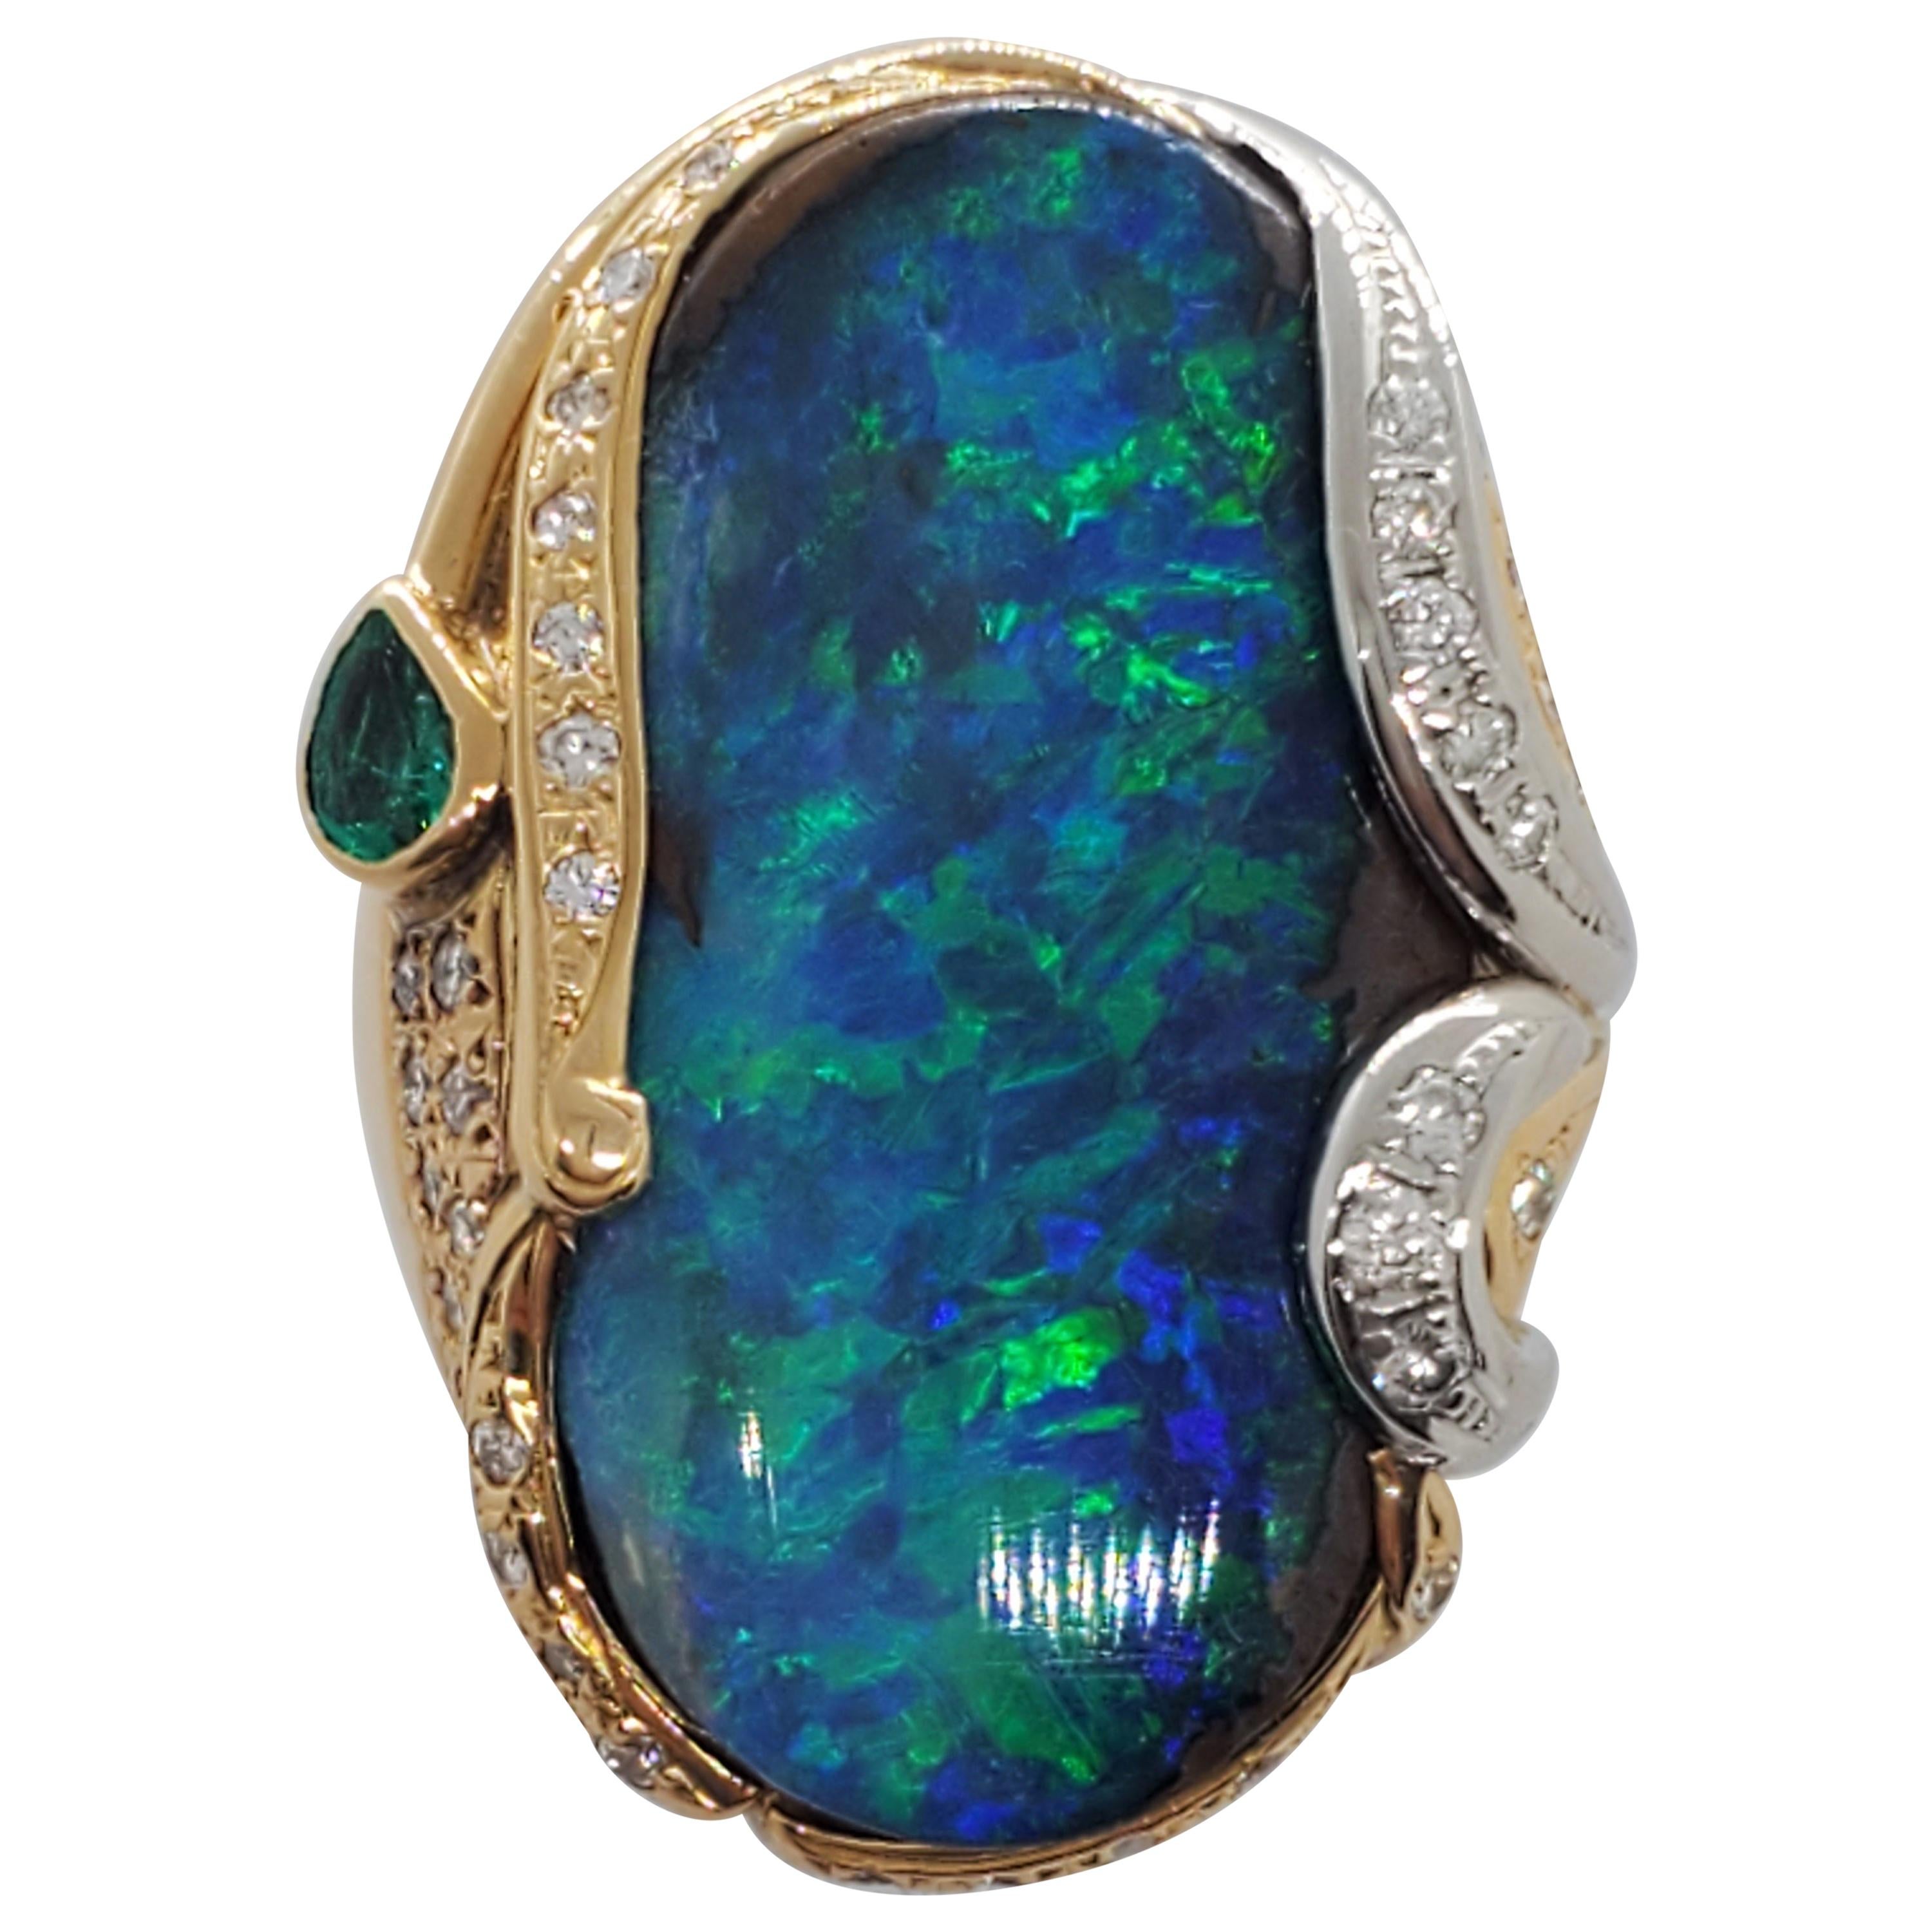 Boulder Opal Cabochon, Emerald, and White Diamond Ring in 18 Karat Gold